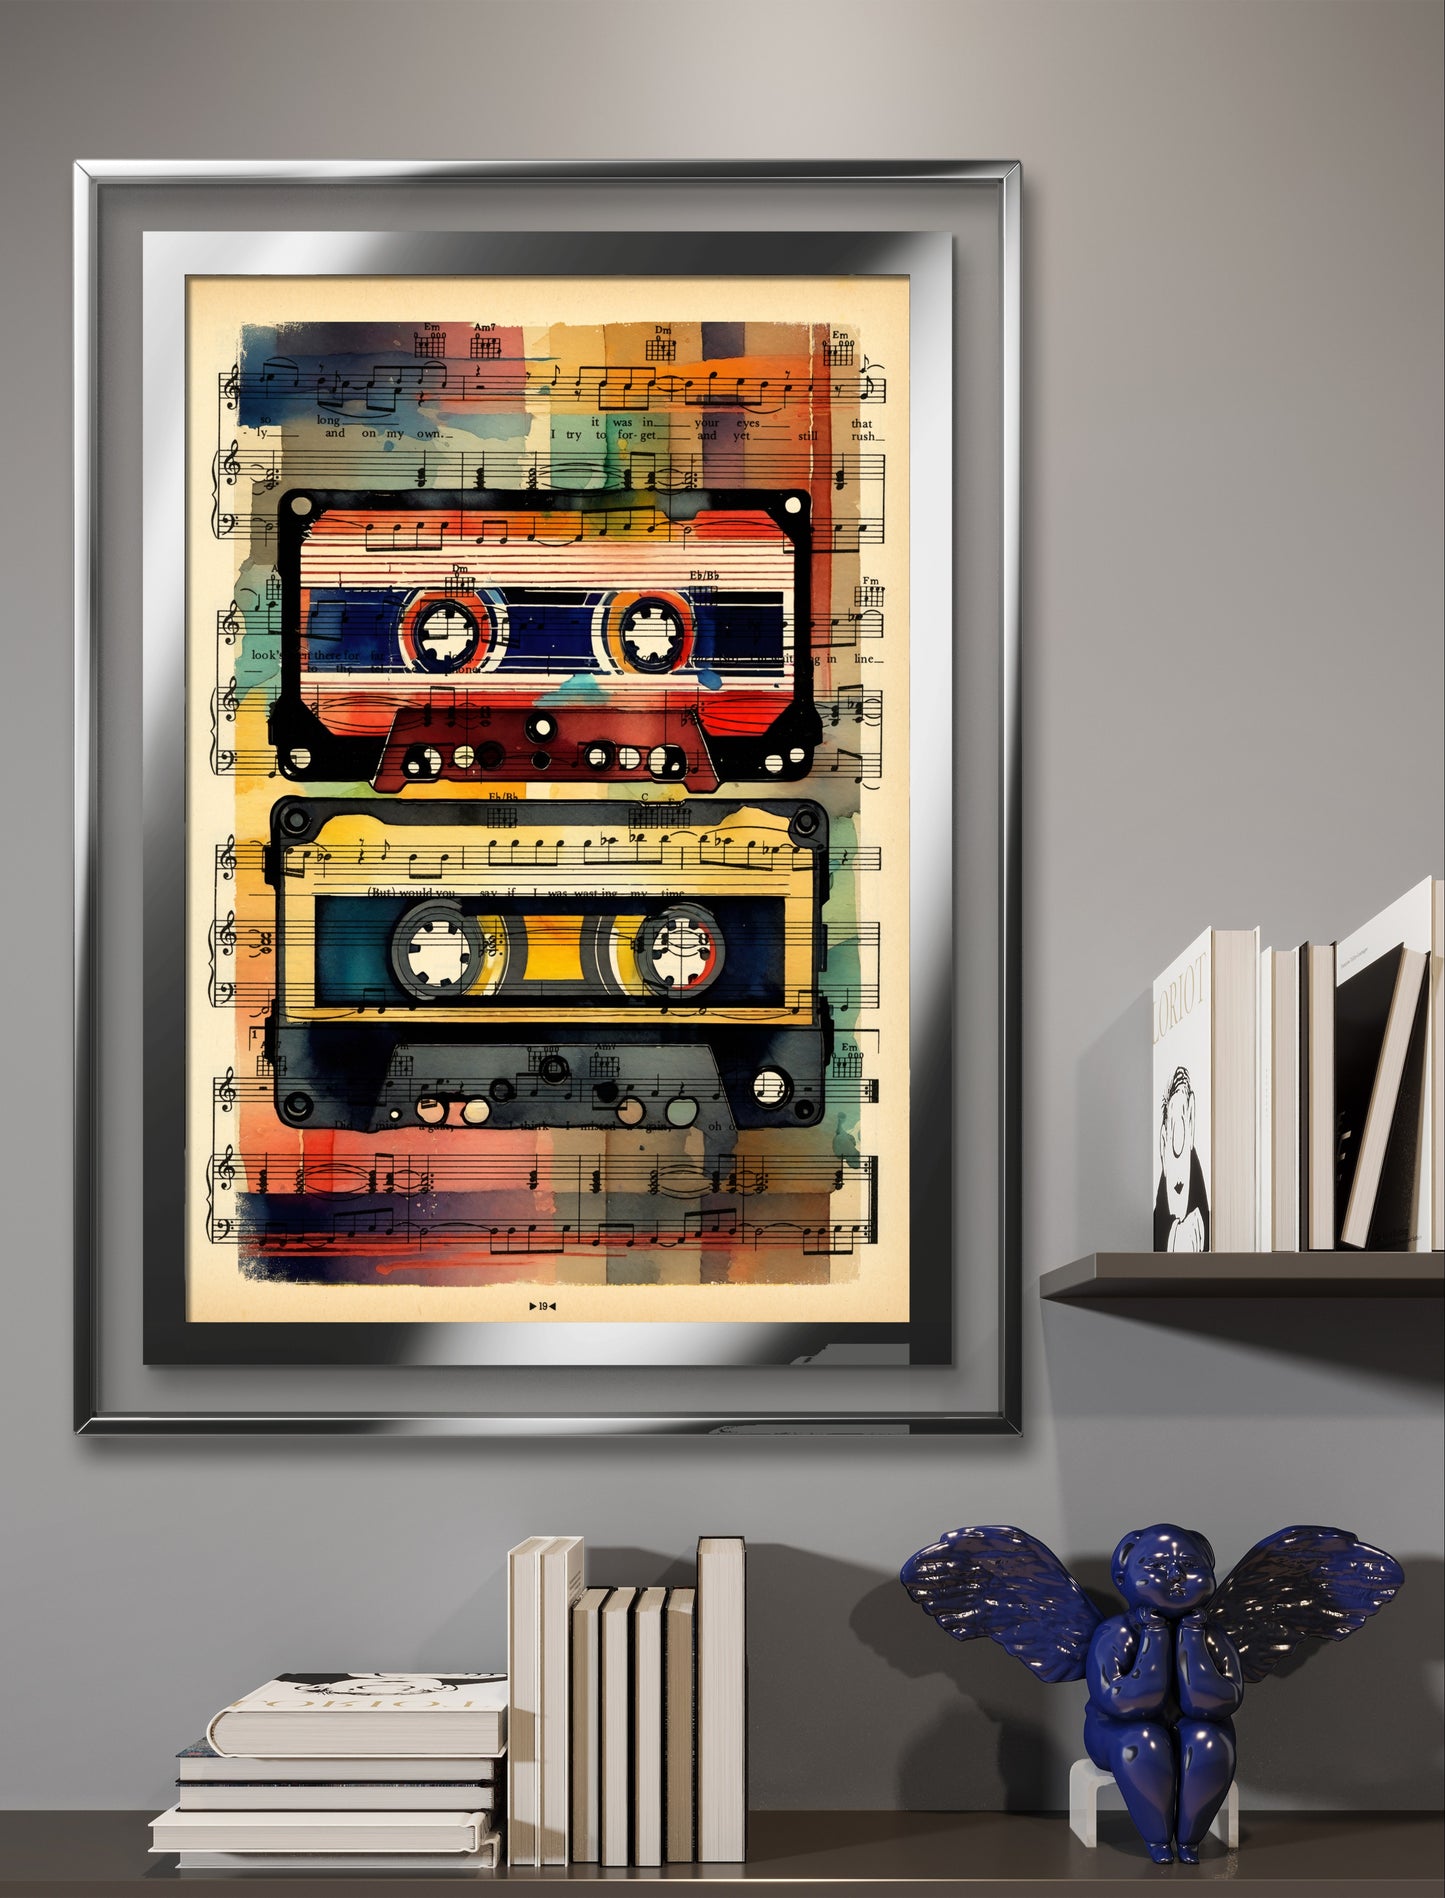 Immerse yourself in the essence of a bygone era with HiFi Retro Audio MixTape.